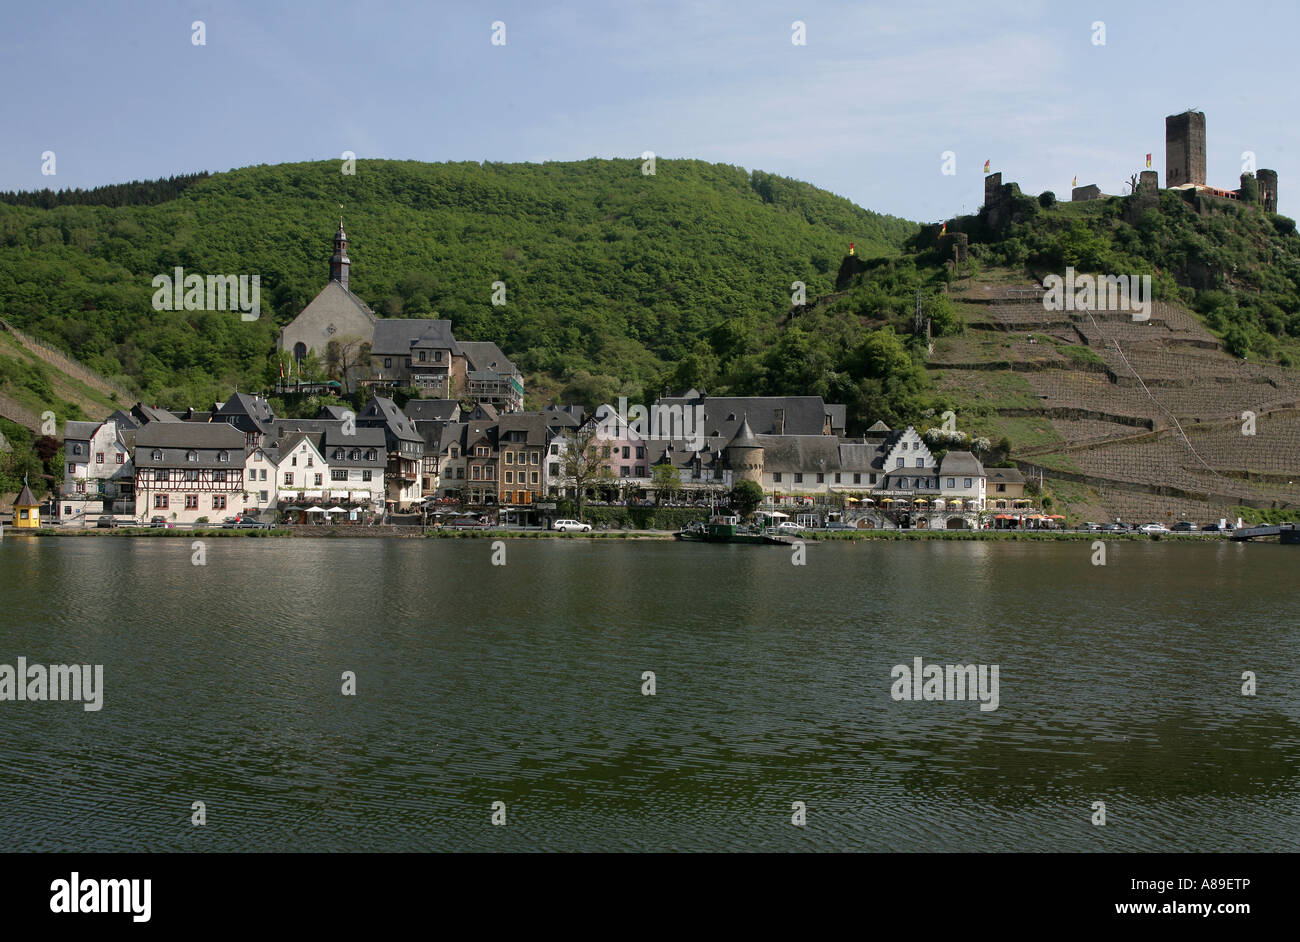 Beilstein in the moselle valley, Rhineland-Palatinate Germany Stock Photo